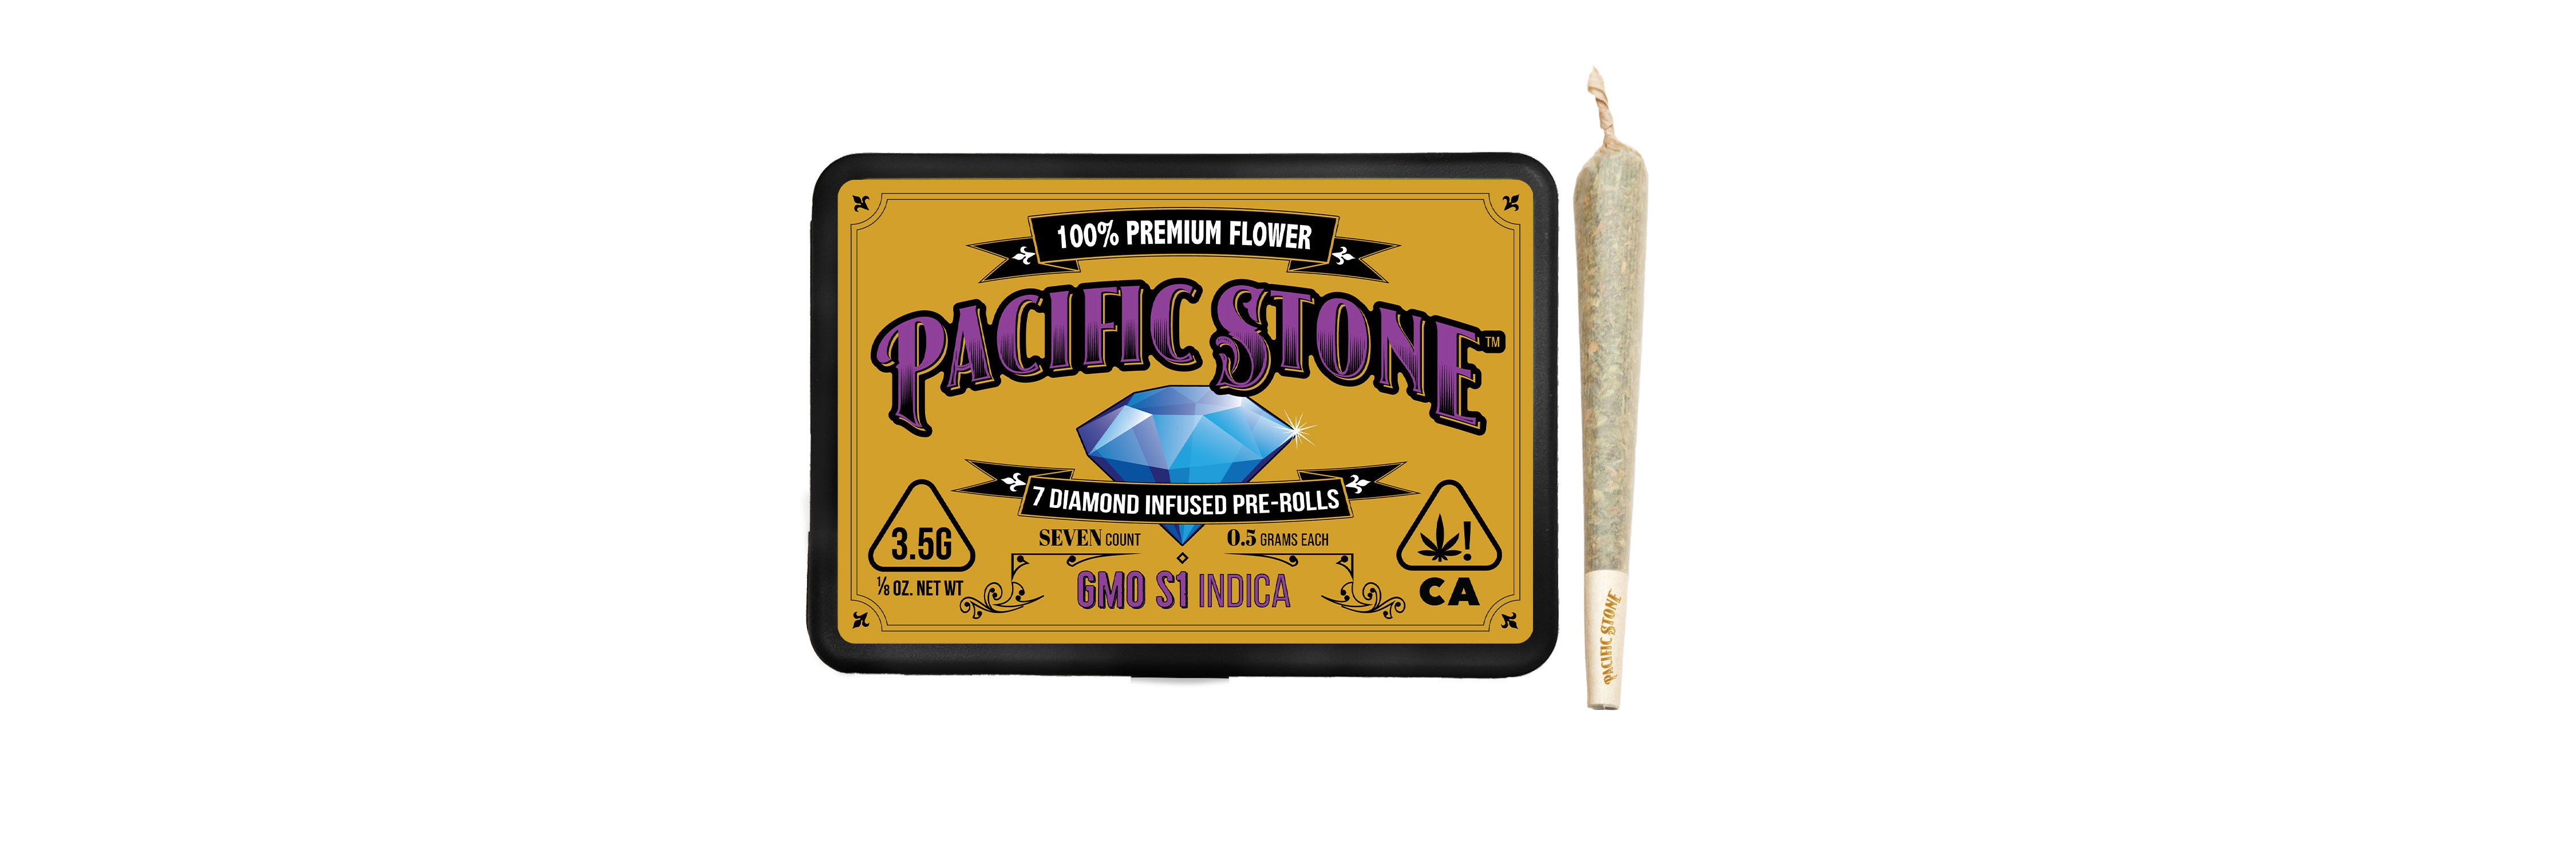 A photograph of Pacific Stone Diamond Infused Prerolls 0.5g Indica GMO 7-Pack 3.5g